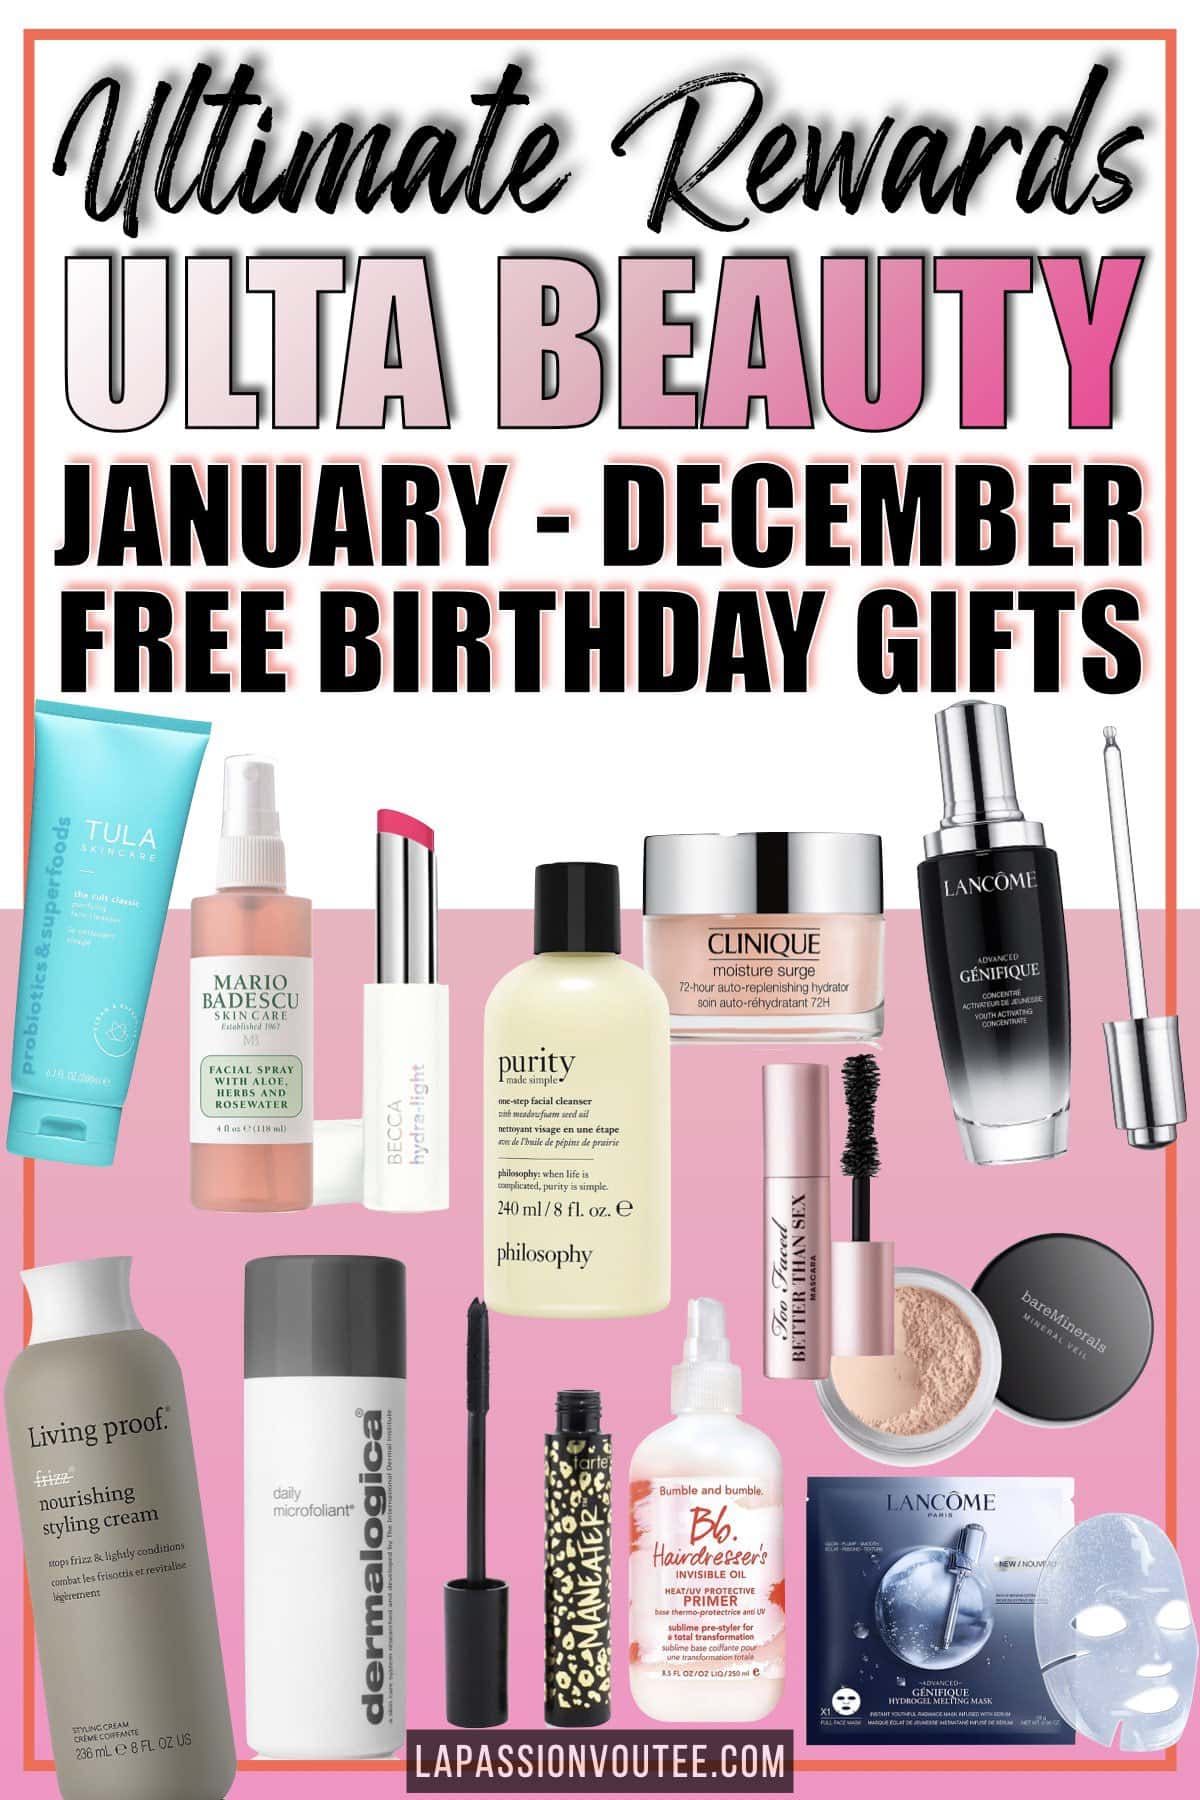 This is the FULL list of the 2021 Ulta FREE birthday gifts from January to December. Plus insider tips on the free Ultimate Rewards membership + recent changes. From Dermalogica, Becca, Living Proof and Clinique to Tarte, Mario Badescu, Bumble and Bumble, and Bare Minerals there's a birthday goodie for everyone. #ulta #ultabeauty #freegift